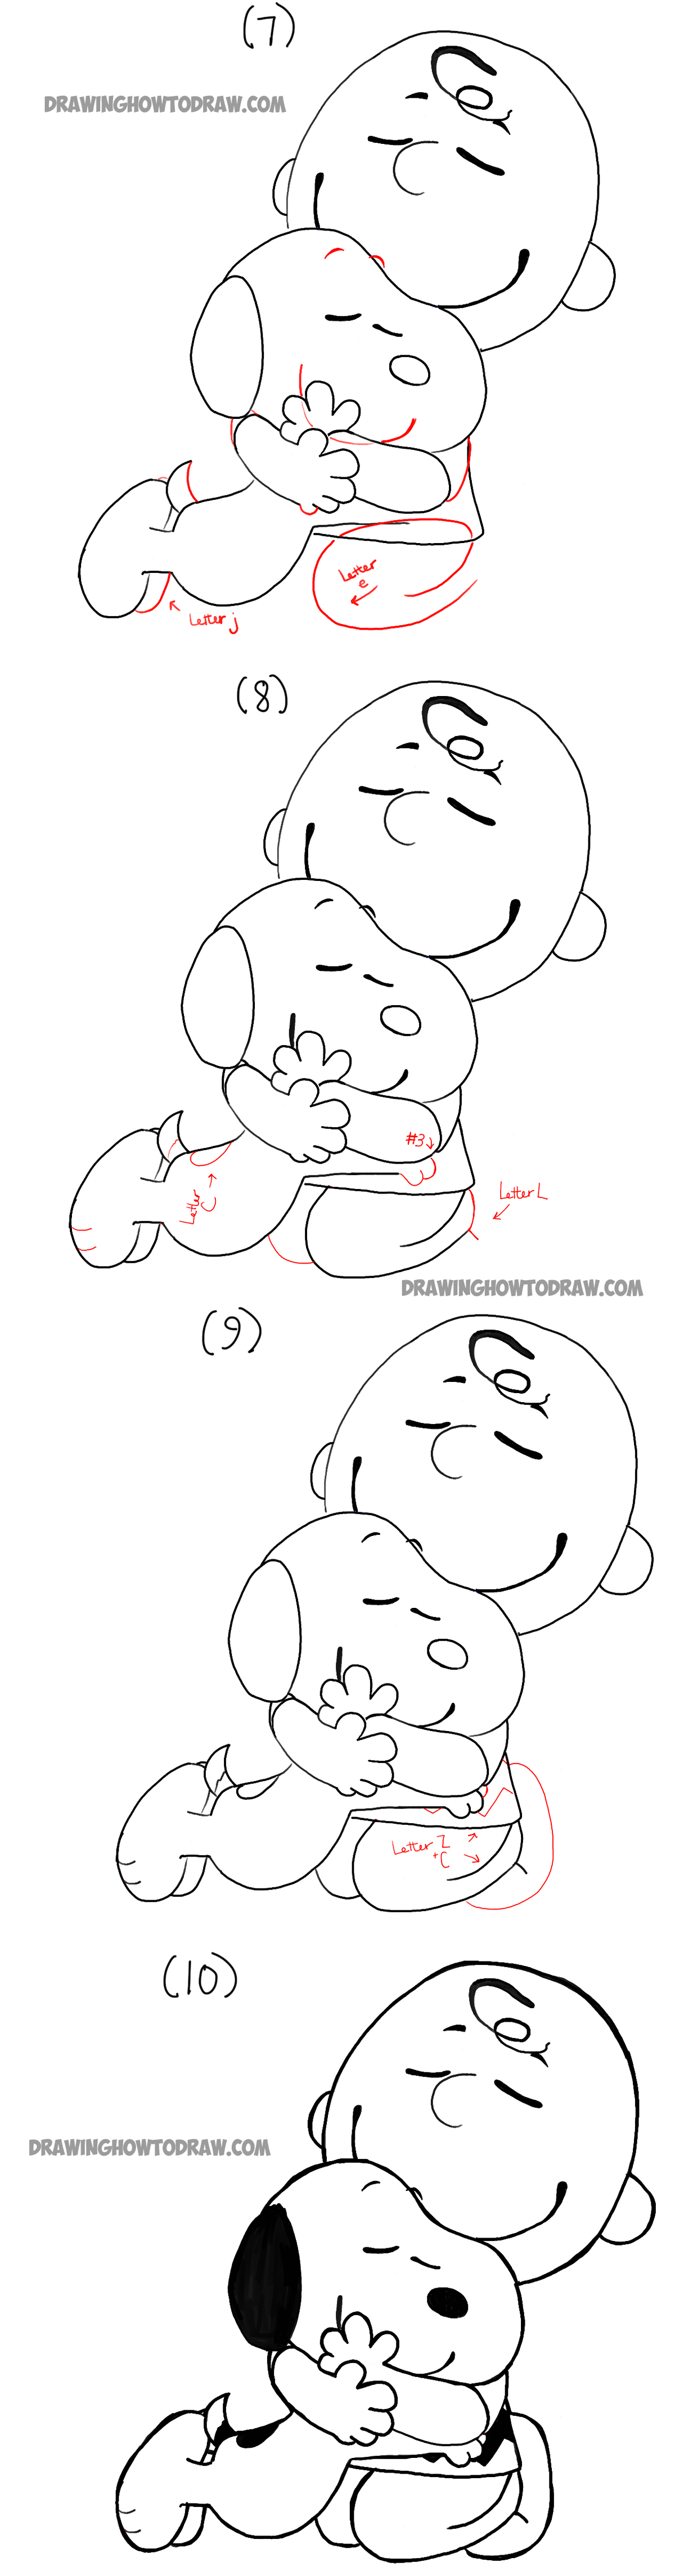 How to Draw Snoopy and Charlie Brown from The Peanuts Movie Step by Step Drawing Tutorial